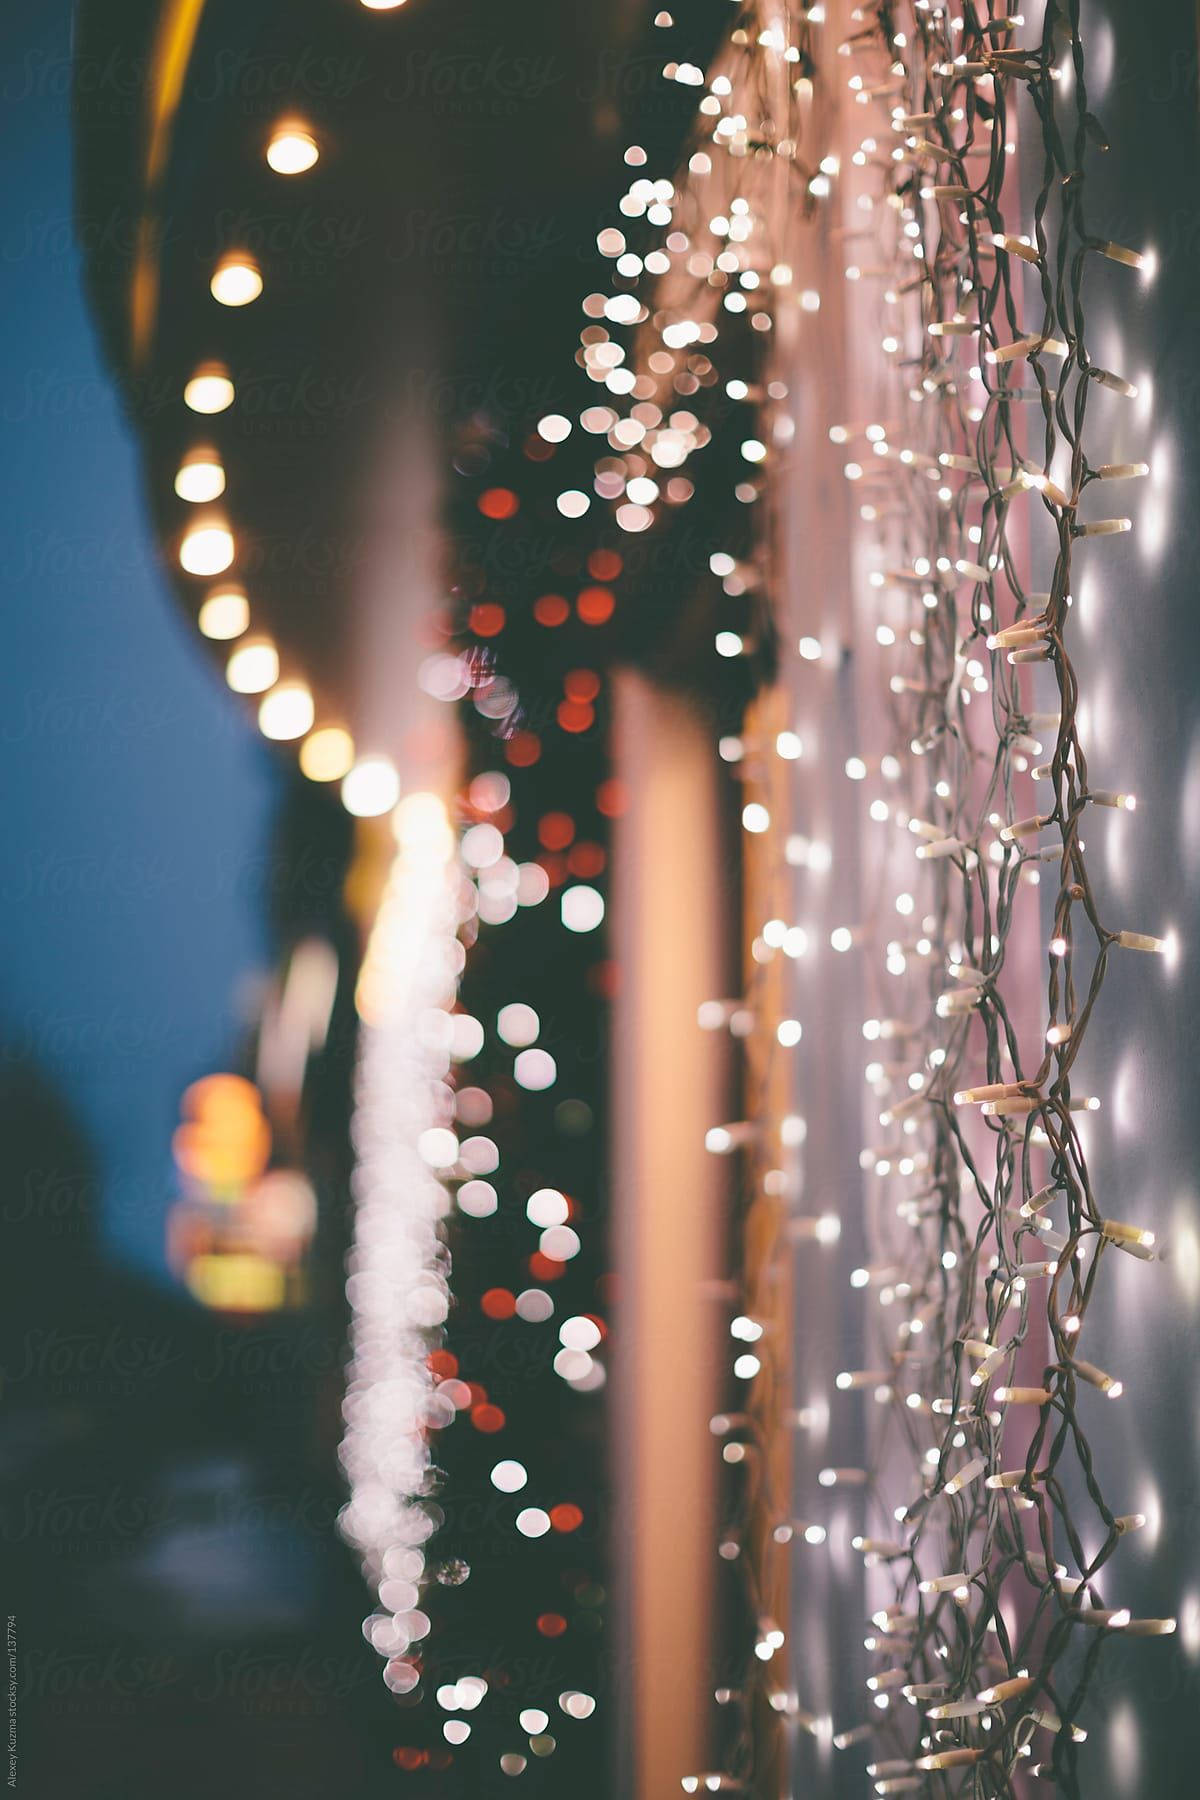 Experience the Magic of Christmas with a Festive Christmas Lights Aesthetic Wallpaper